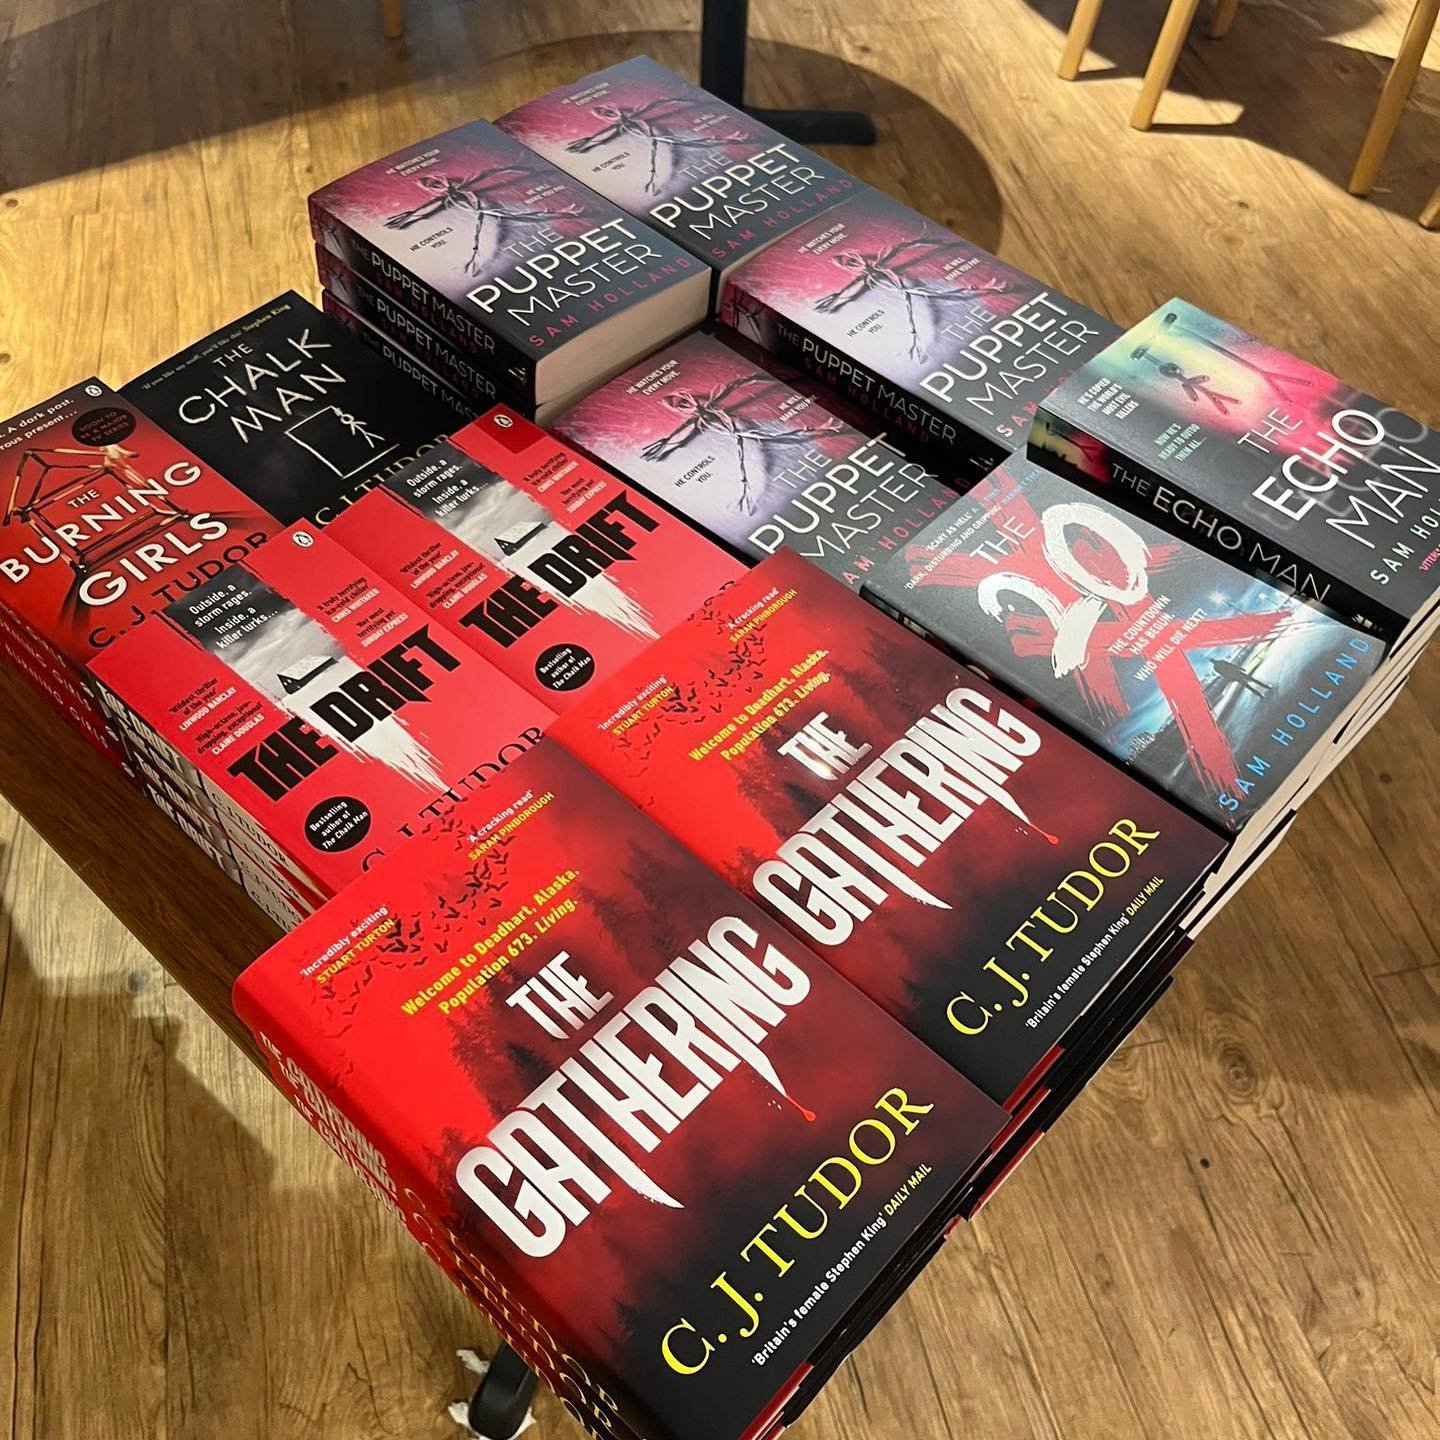 Thank you to Lauren and the wonderful team at @southamptonwaterstones for a fantastic event with @cjtudorauthor tonight. I had such a great evening - thank you everyone for coming and it was lovely to properly meet Caz after all this time!